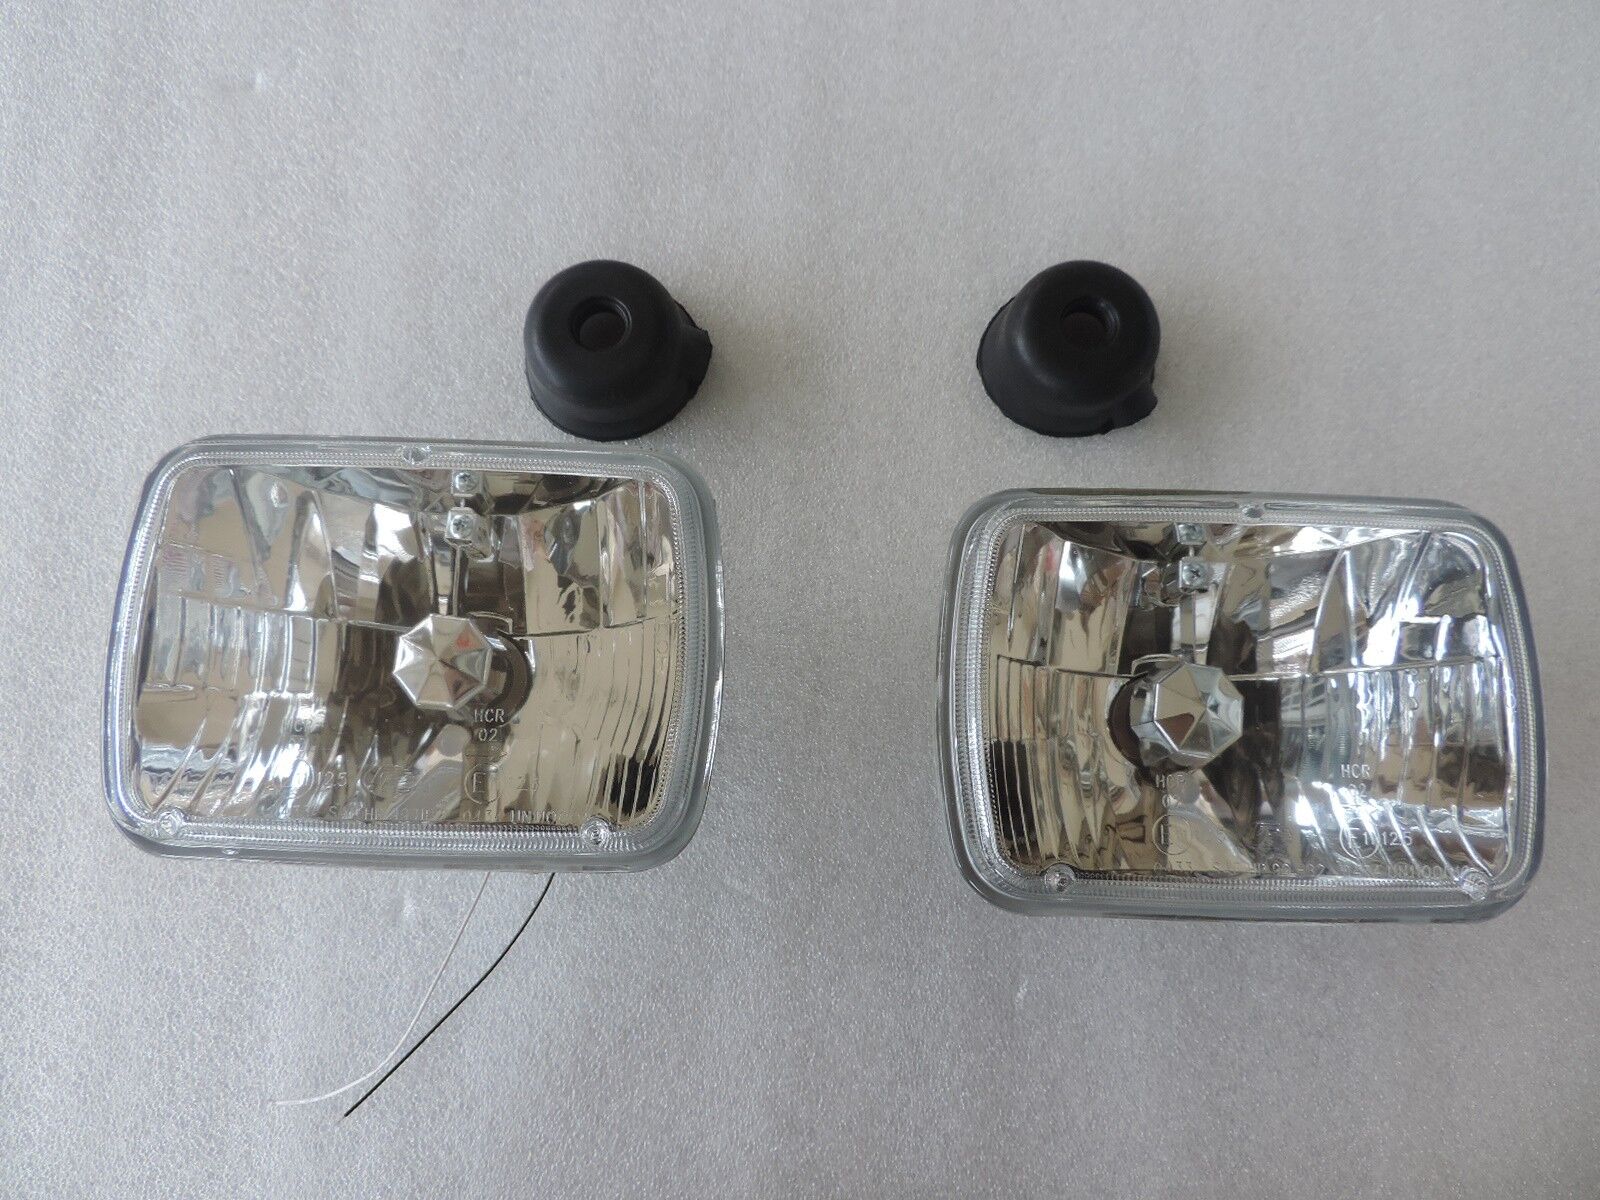 NEW Head Lights For Nissan Silvia S13 180SX 200SX H13 RX-7